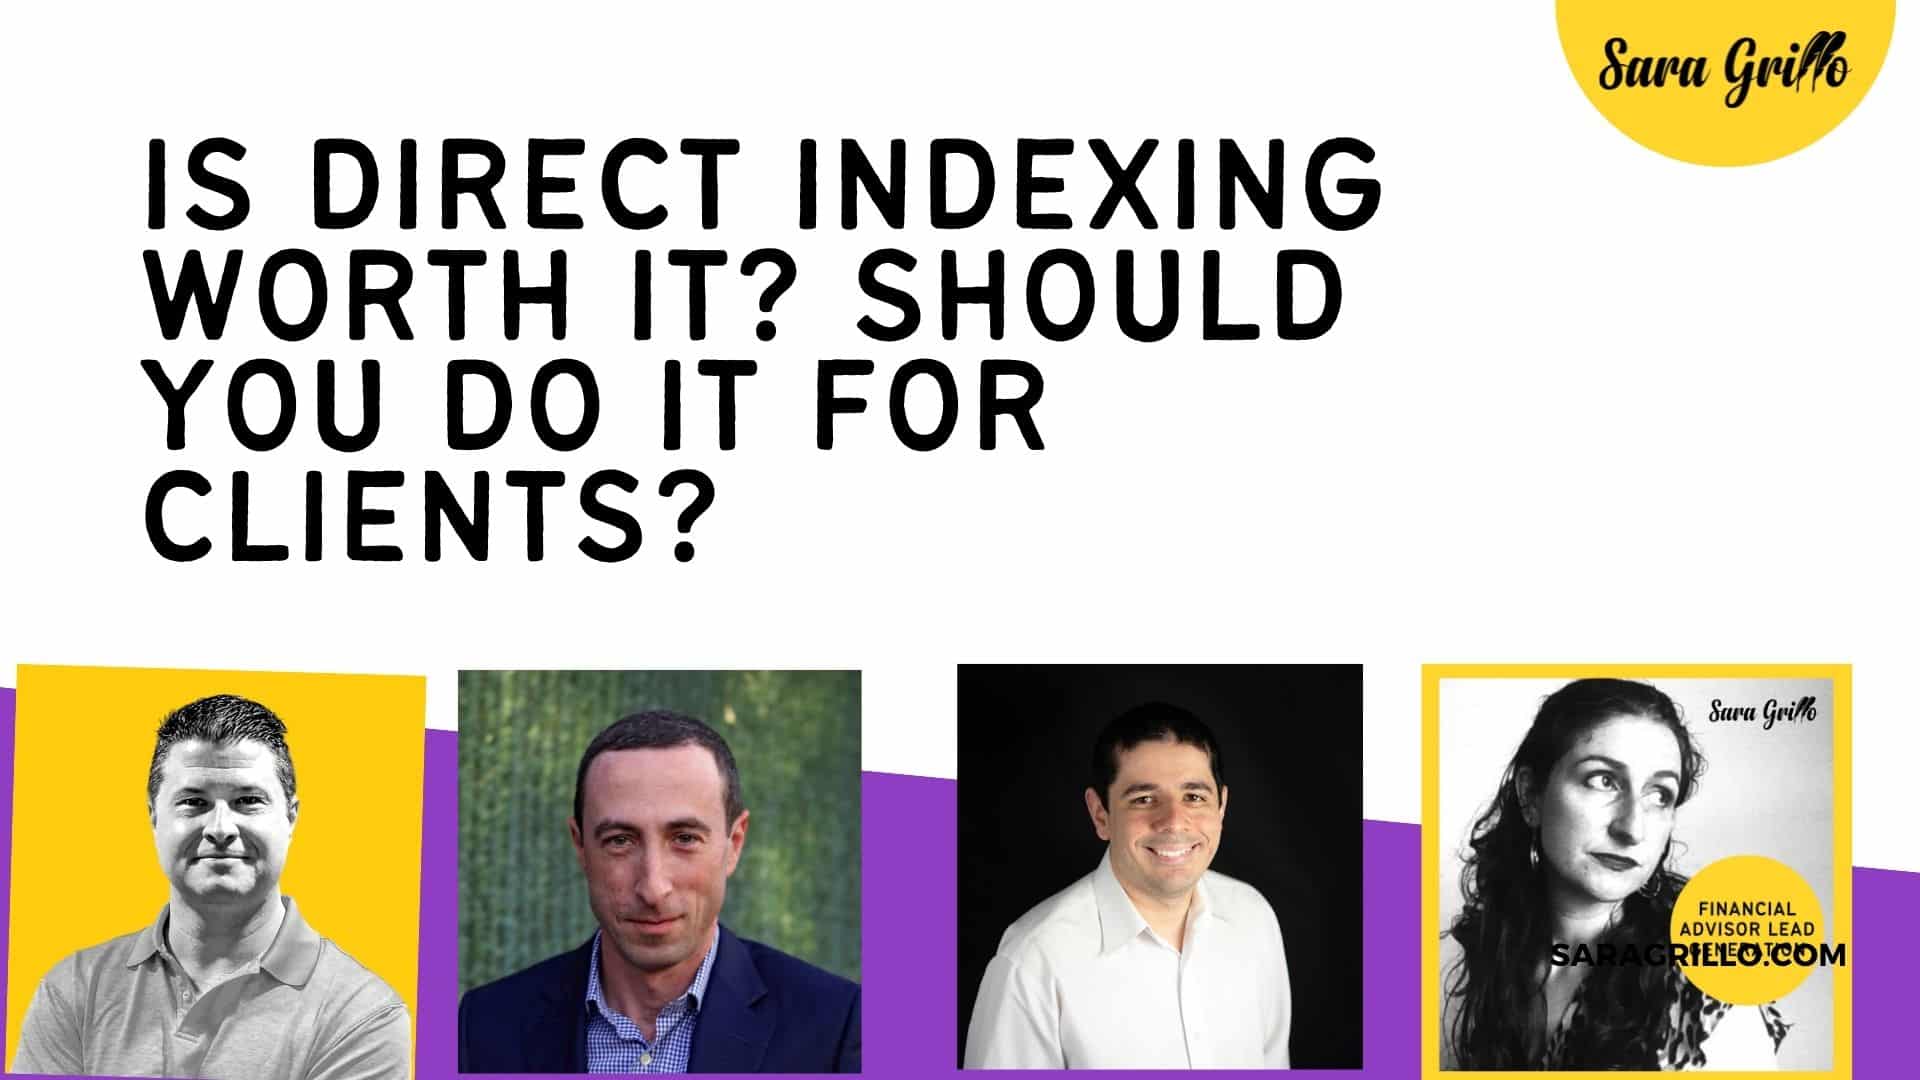 In this debate we discuss whether direct indexing is worth it or not.